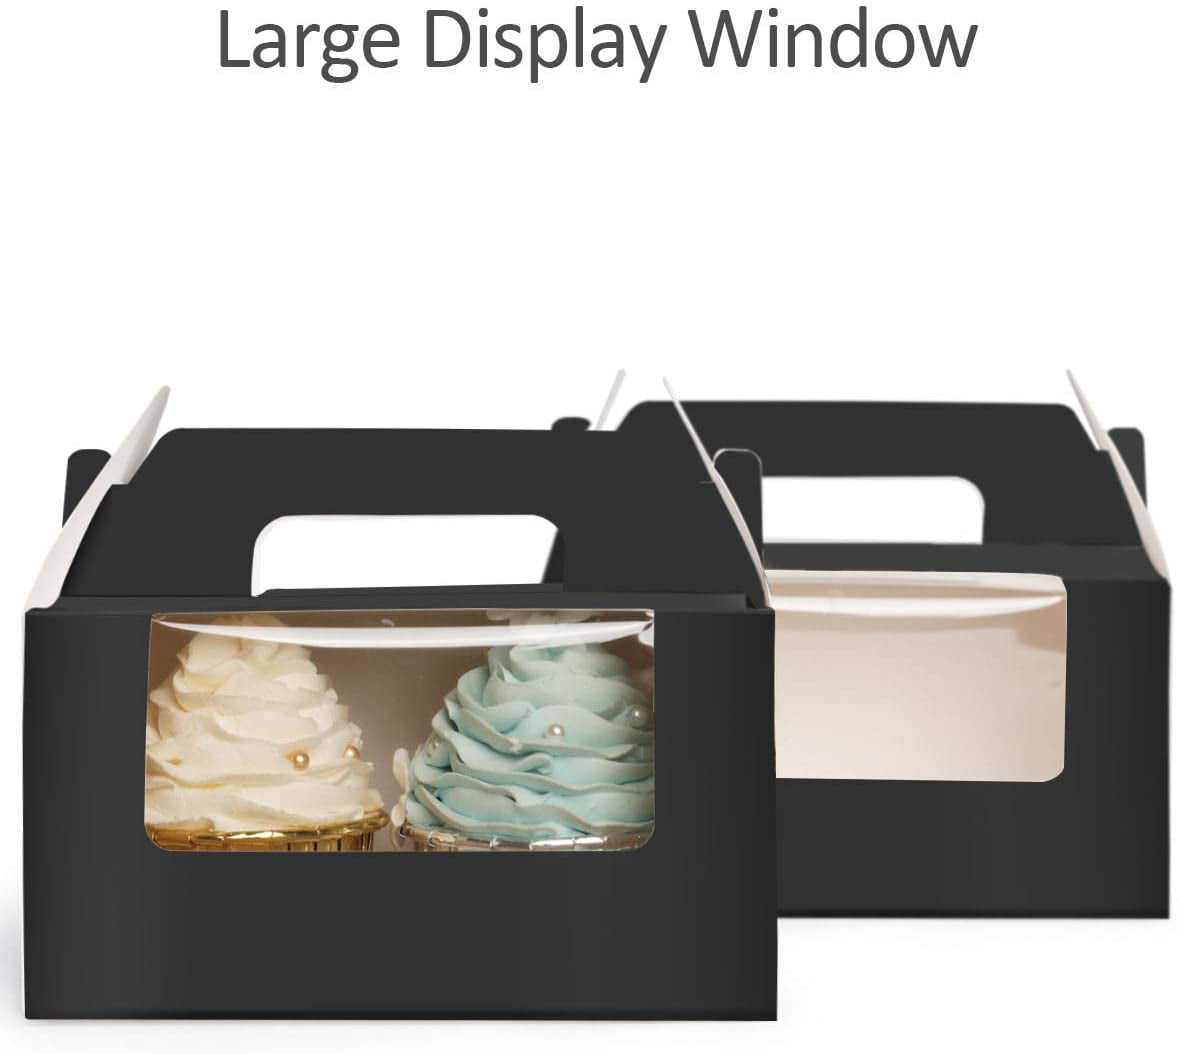 Cupcake Carrier with Insert and Display Window Goodies Favor Candy Treat Boxs Muffin Carry Container Yotruth White Cupcake Box 2 Holders（25Packs）,6.2 x 3.5 x 3.5 inch 